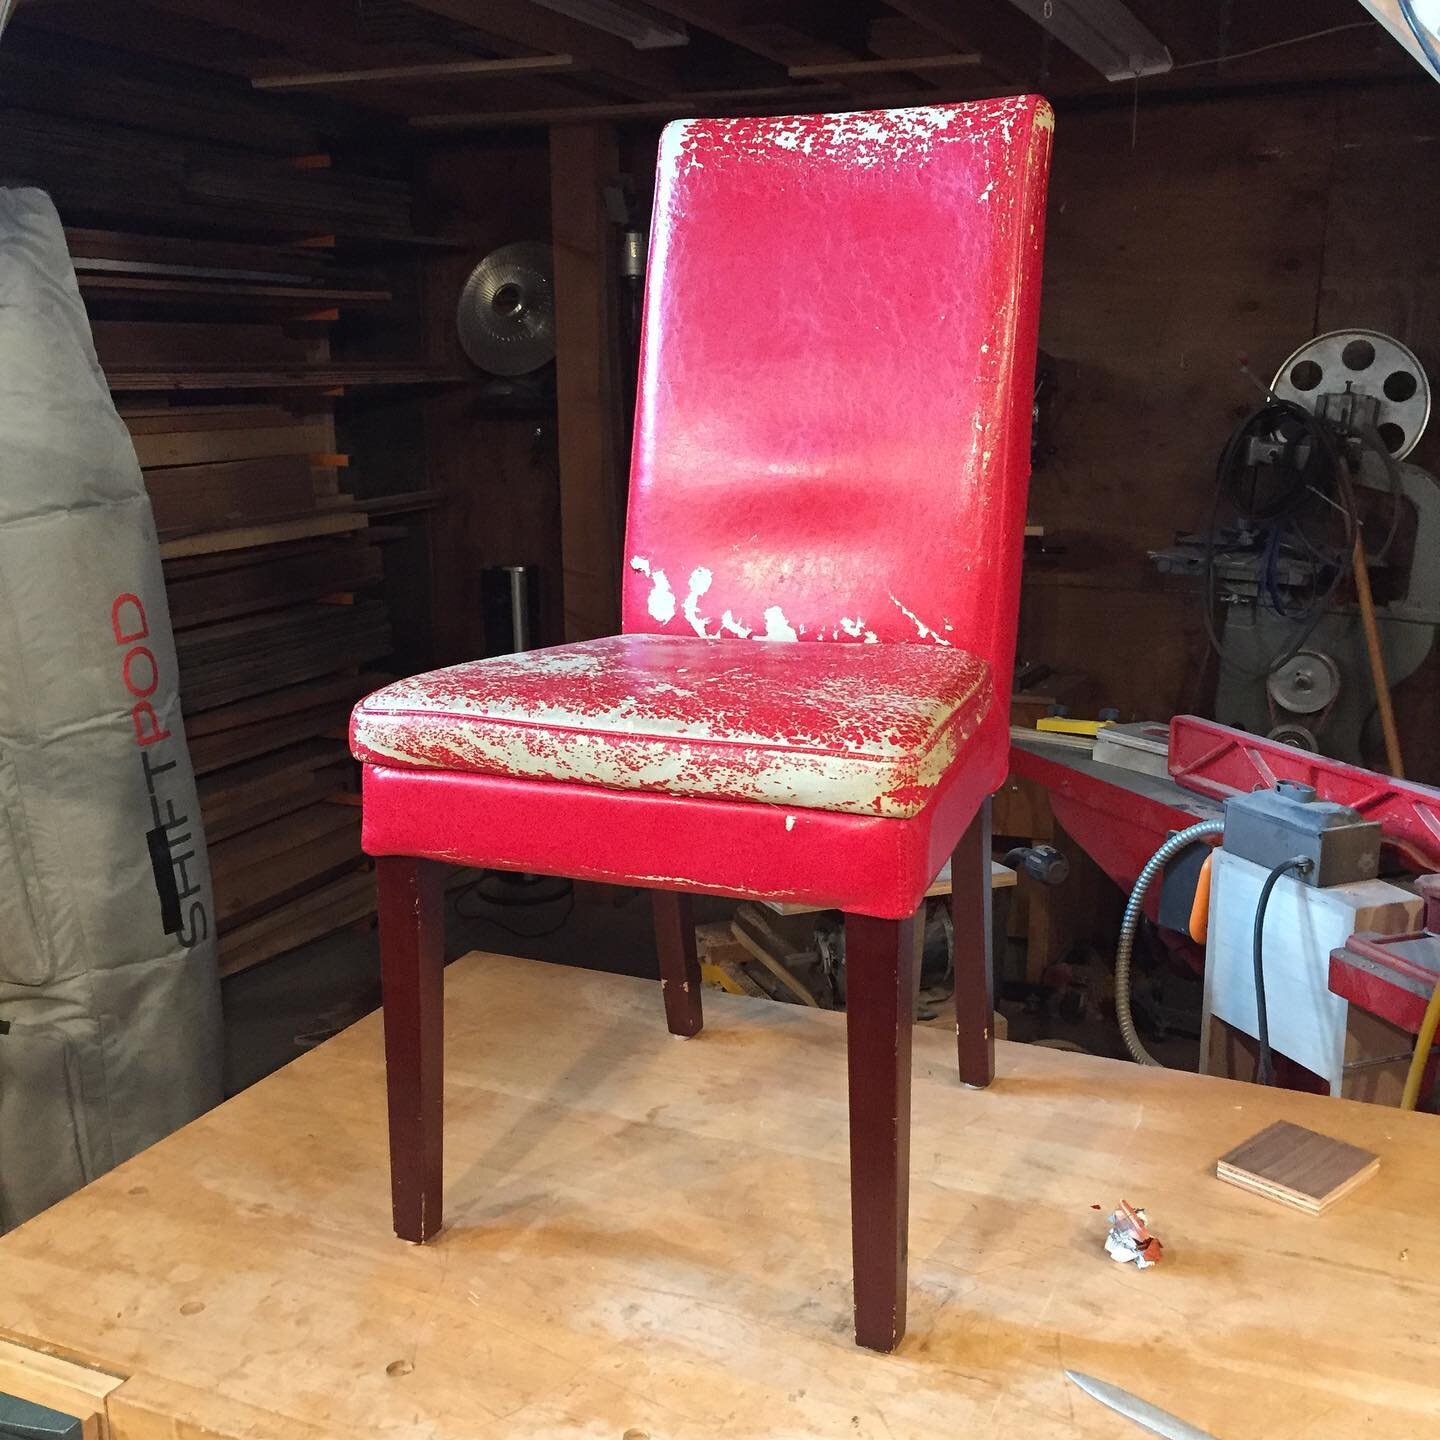 Transforming an old worn out dining chair in 4 easy steps! (Now the real work begins)  #8Branches #rescuechair #handmadechair #madeinsf #8branchesproject #sfwoodworking
#ecofurniture #ecohome #ecodesign #ecodecor #sustainable